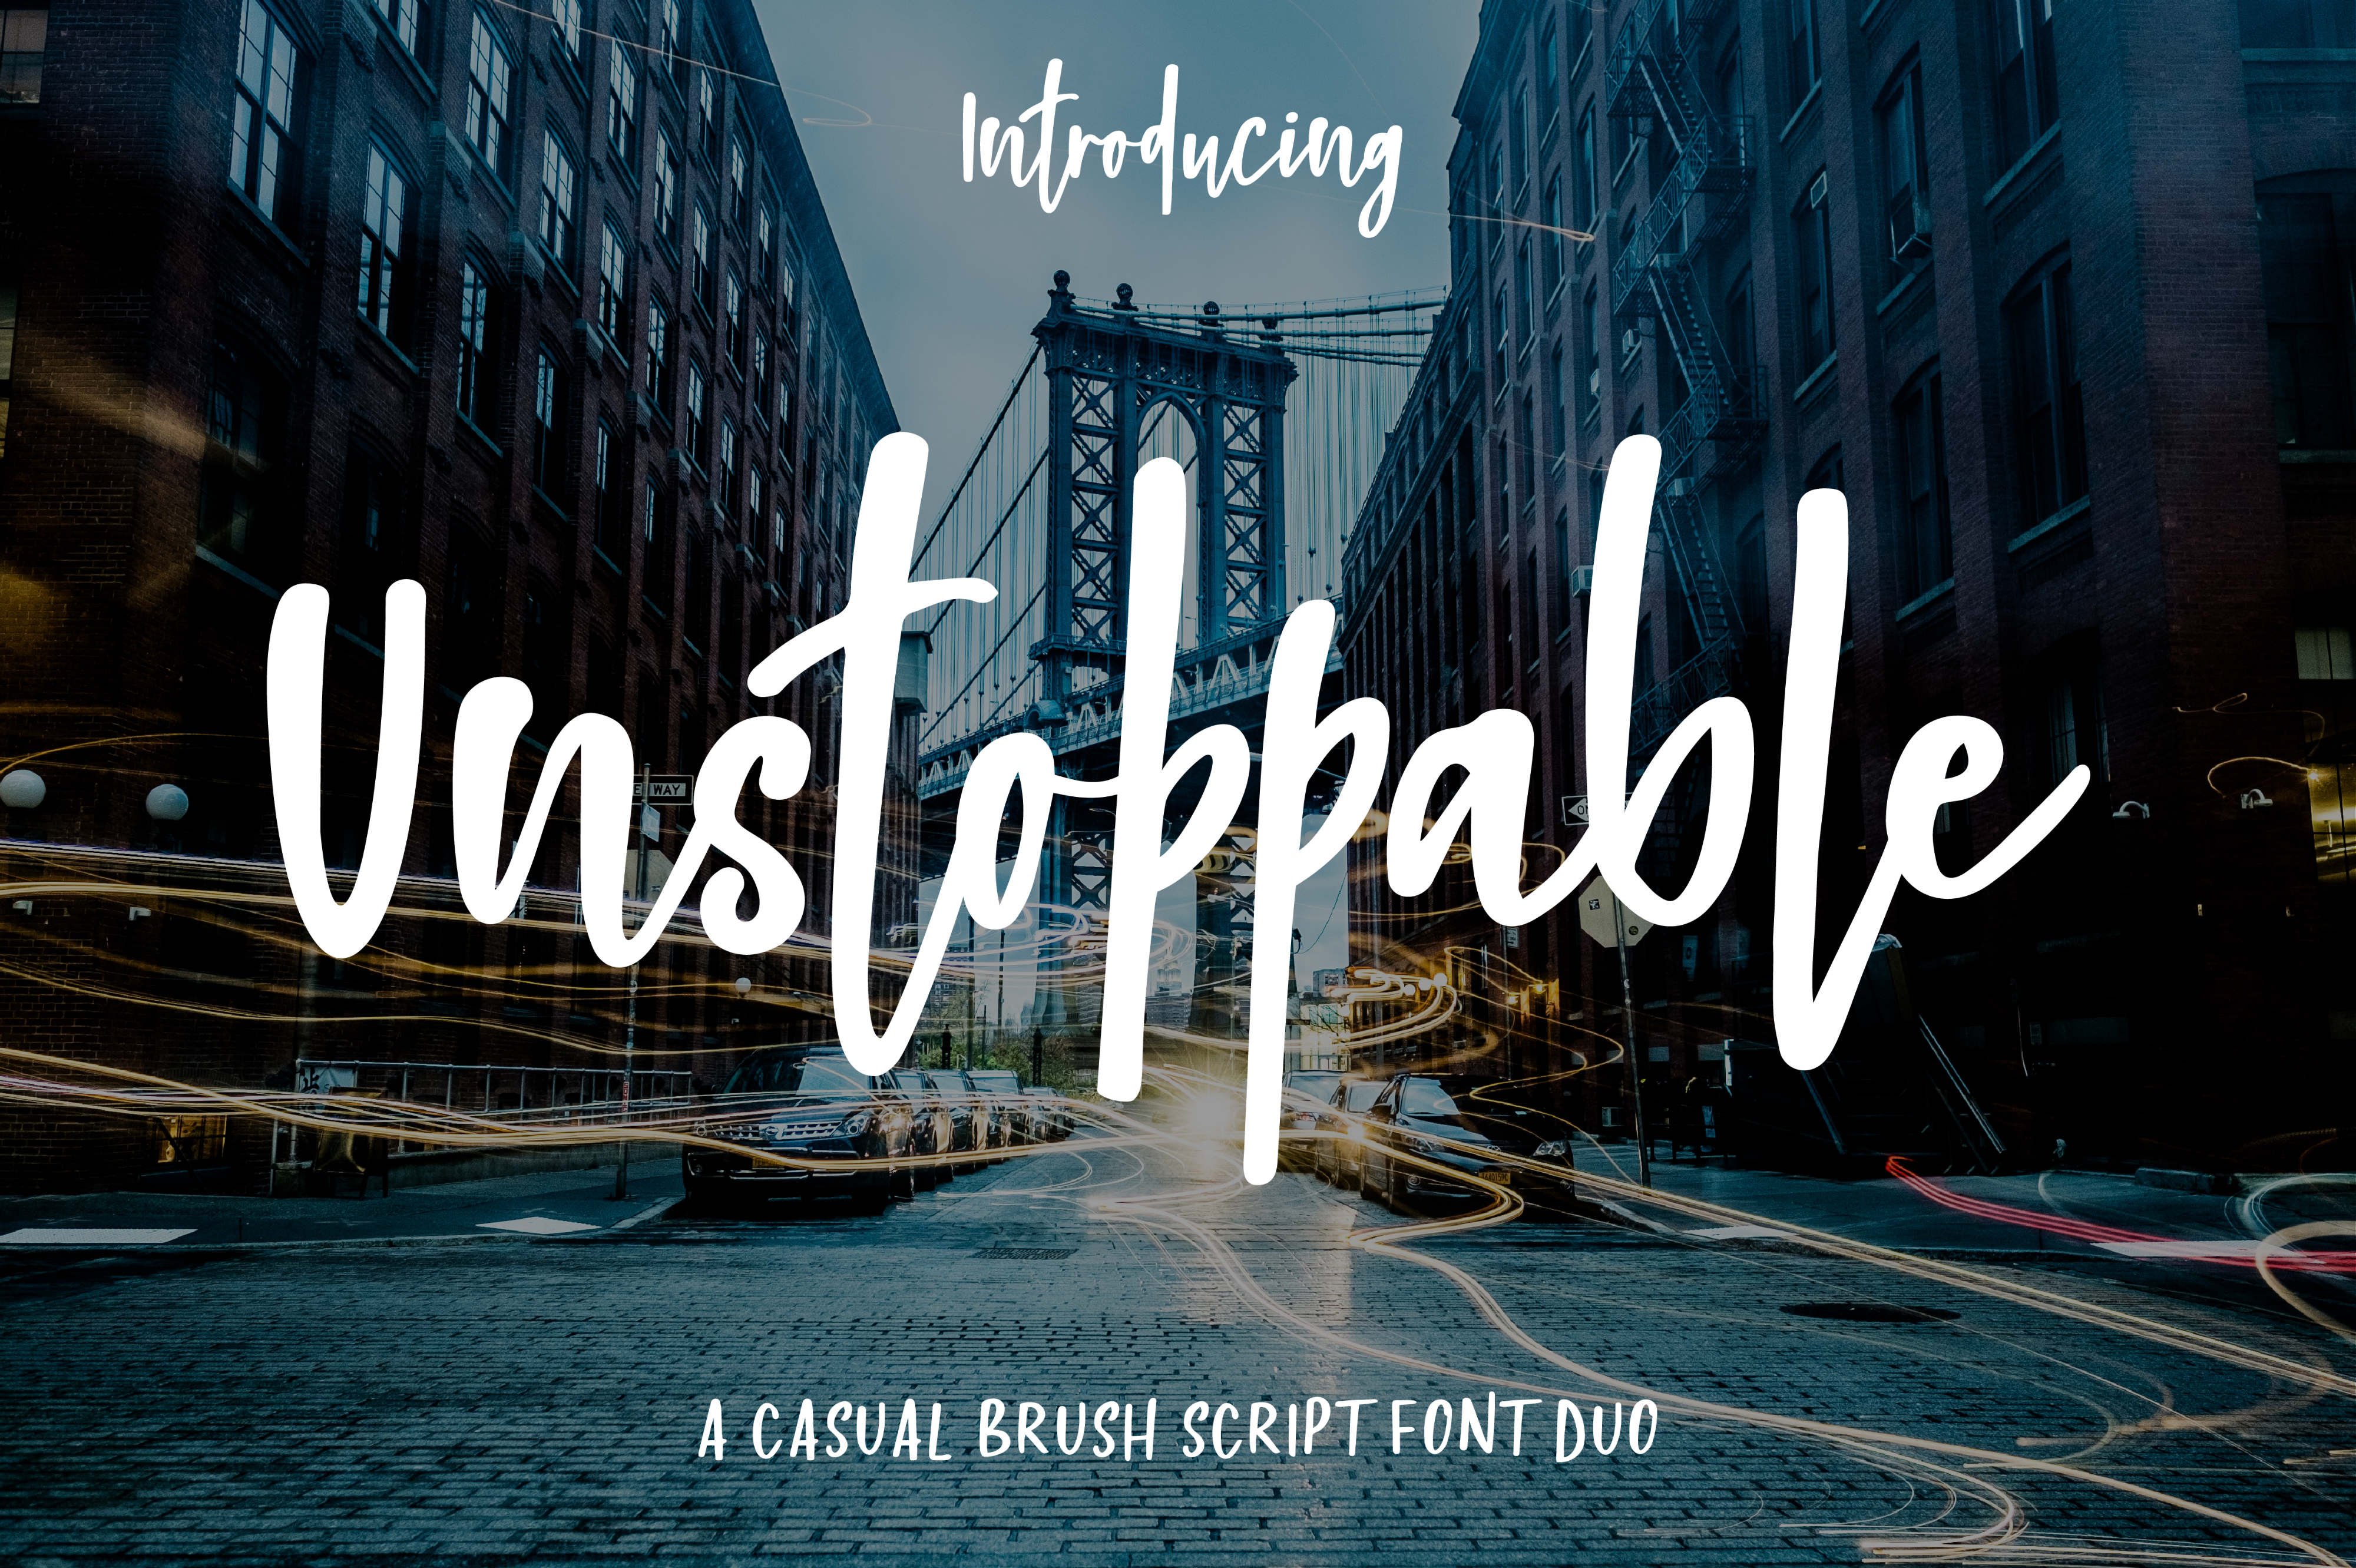 Unstoppable Font Duo cover image.